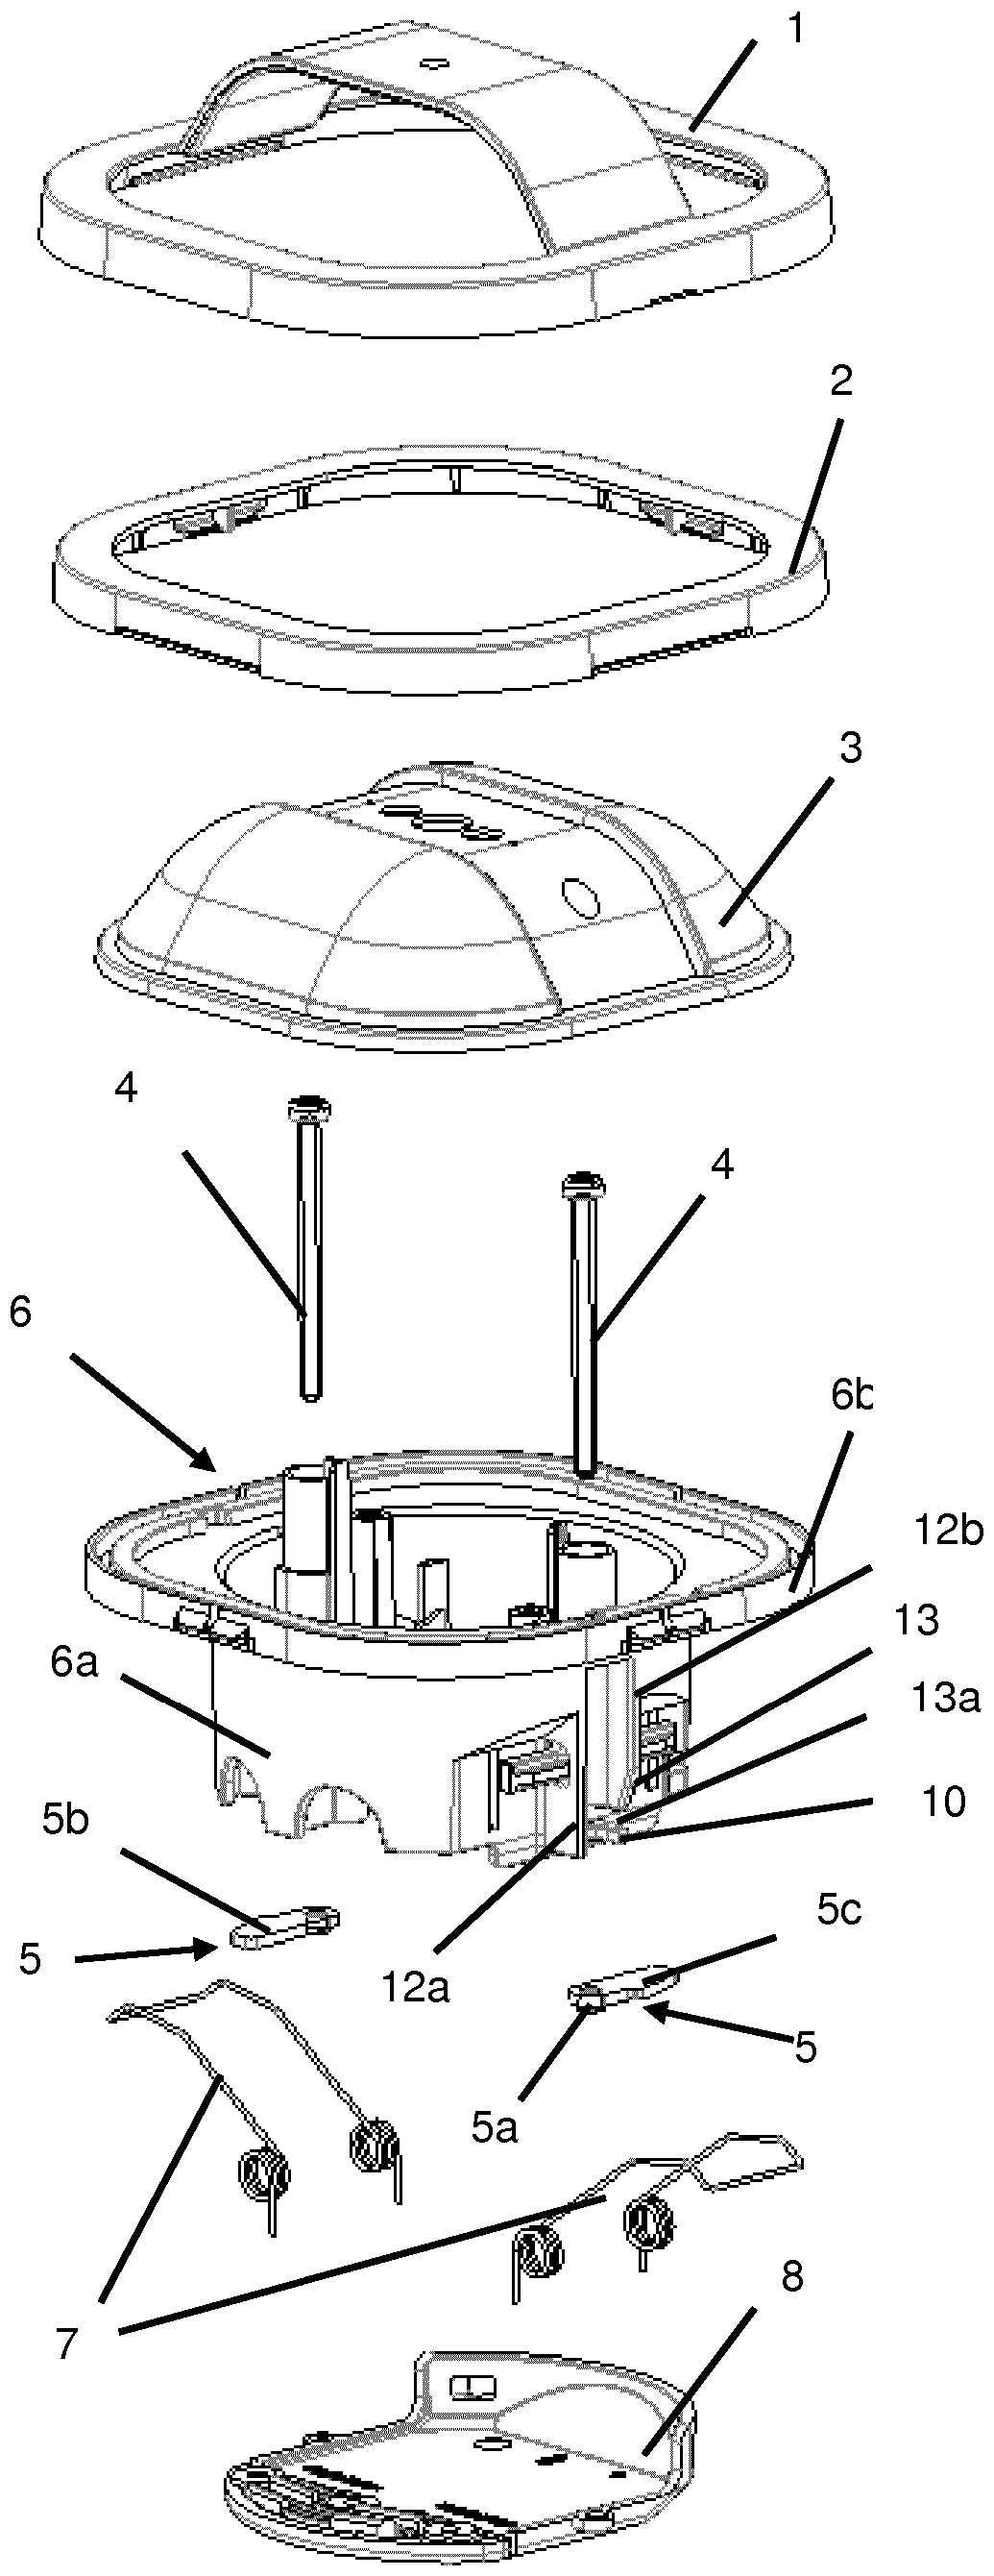 Installation device for mounting in ceiling